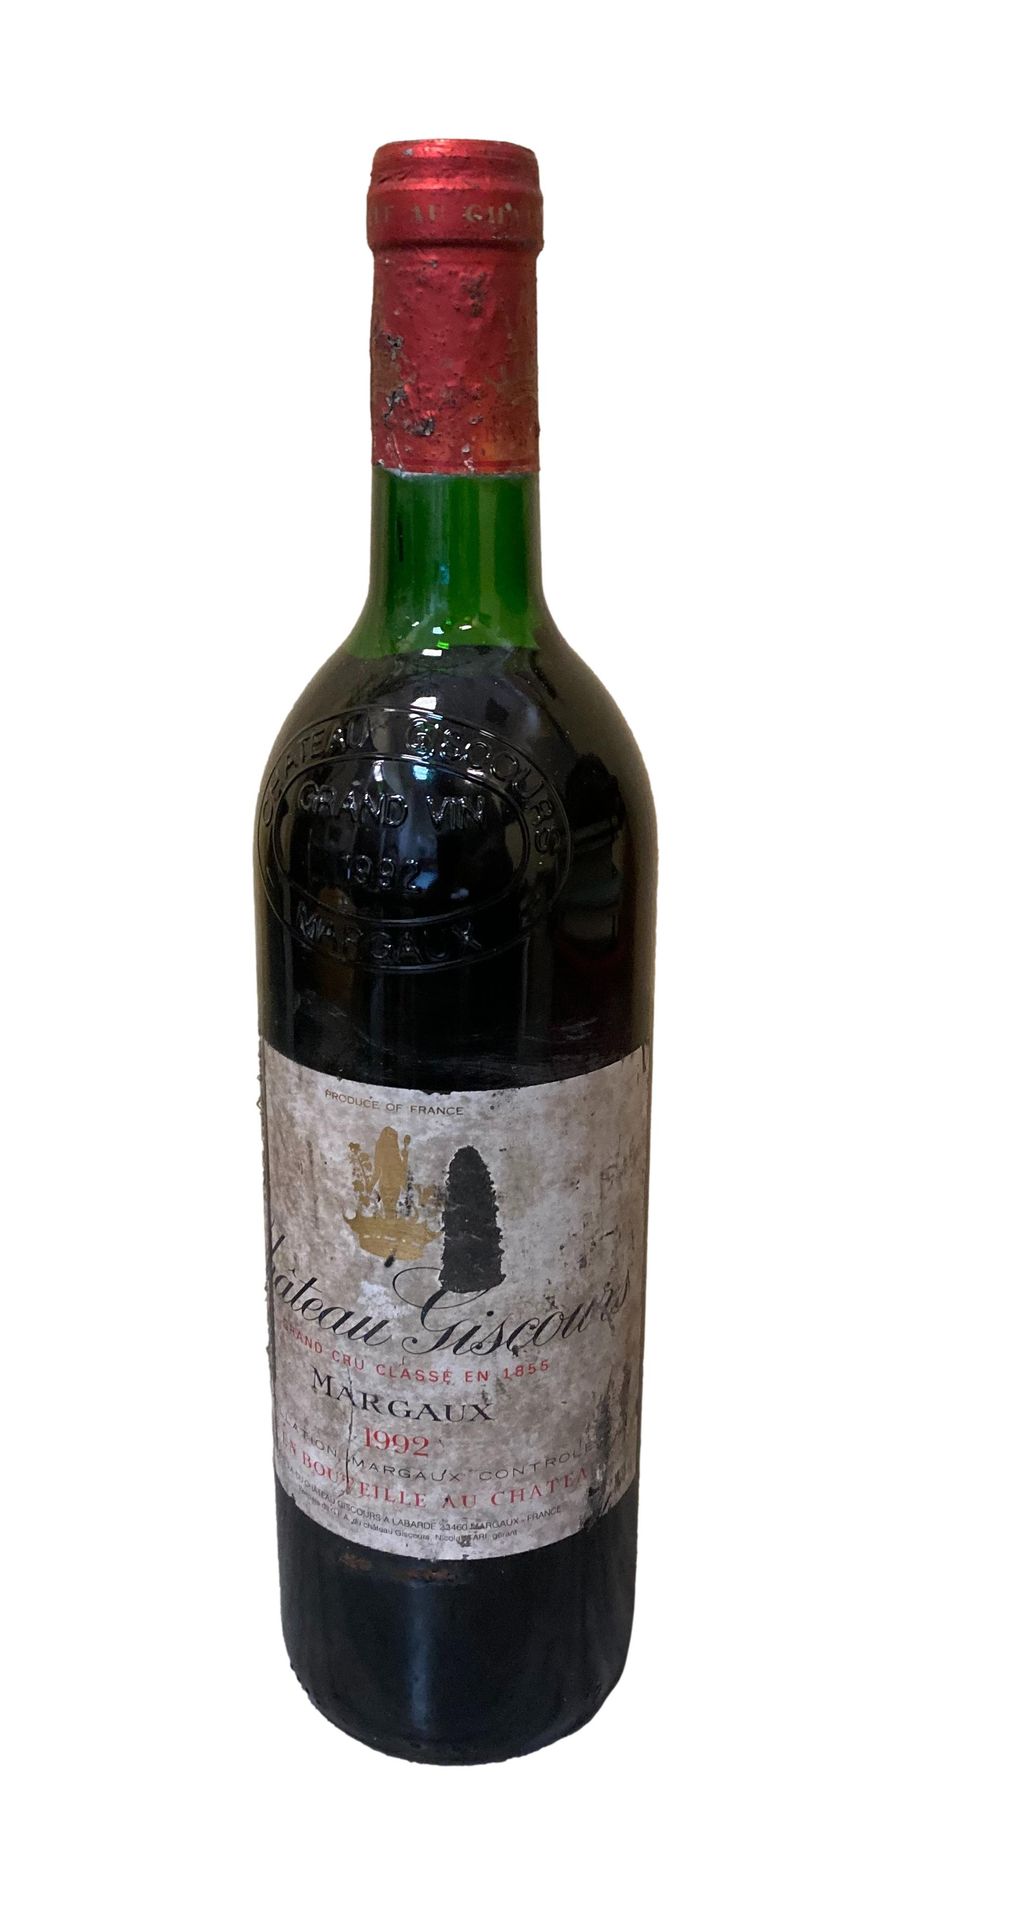 Null CHÂTEAU GISCOURS Margaux 1992
1 bottle